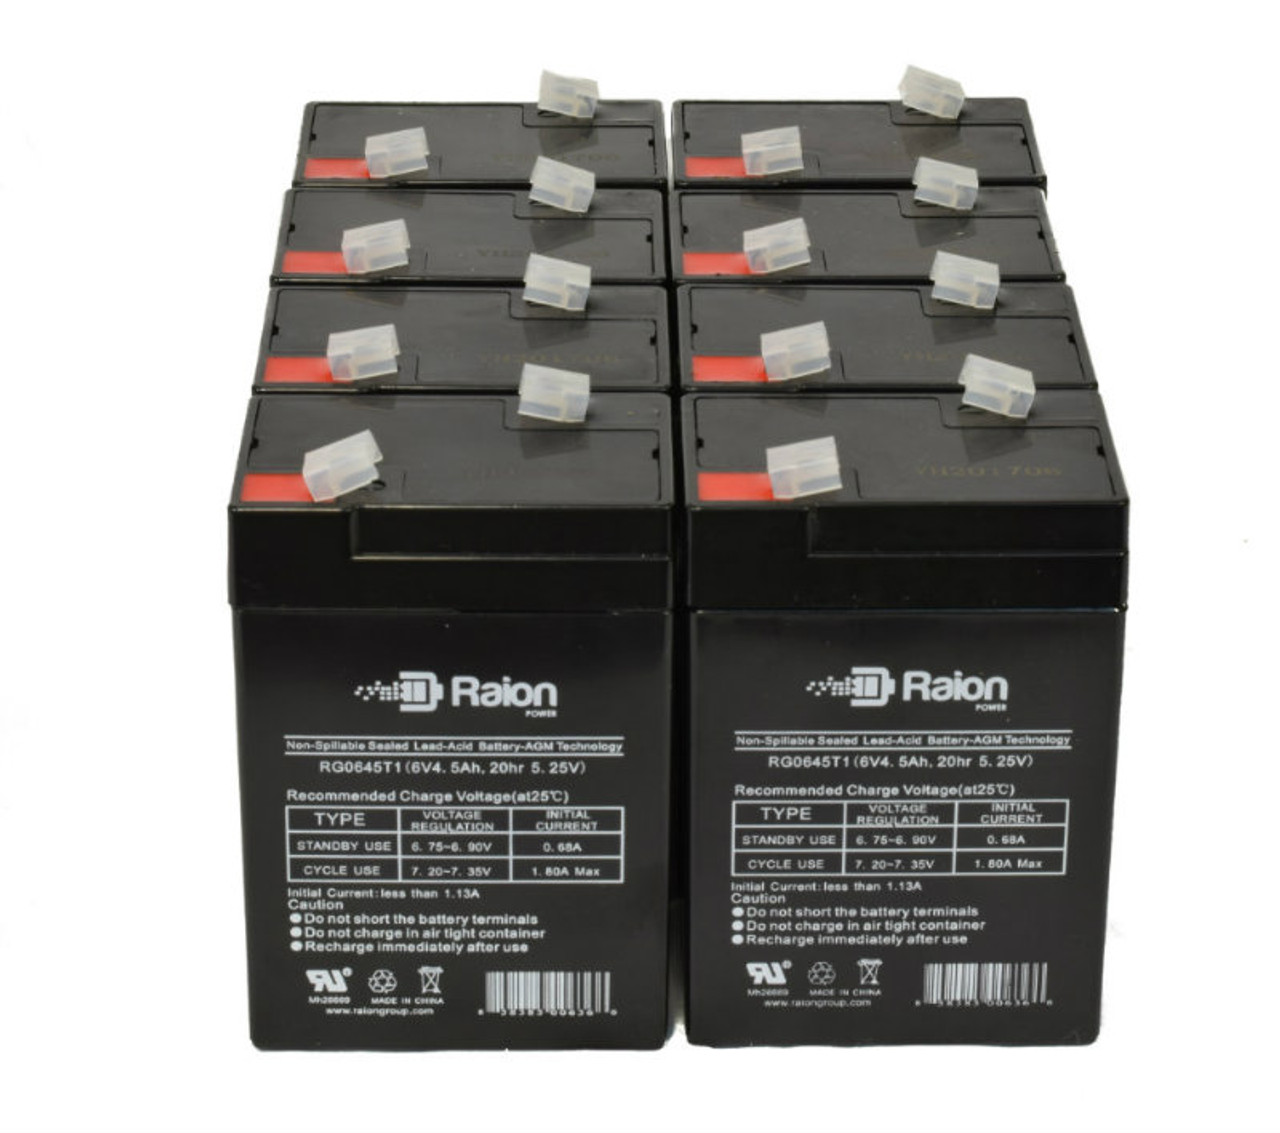 Raion Power 6 Volt 4.5Ah RG0645T1 Replacement Battery for Cellpower CP 4-6 - 8 Pack